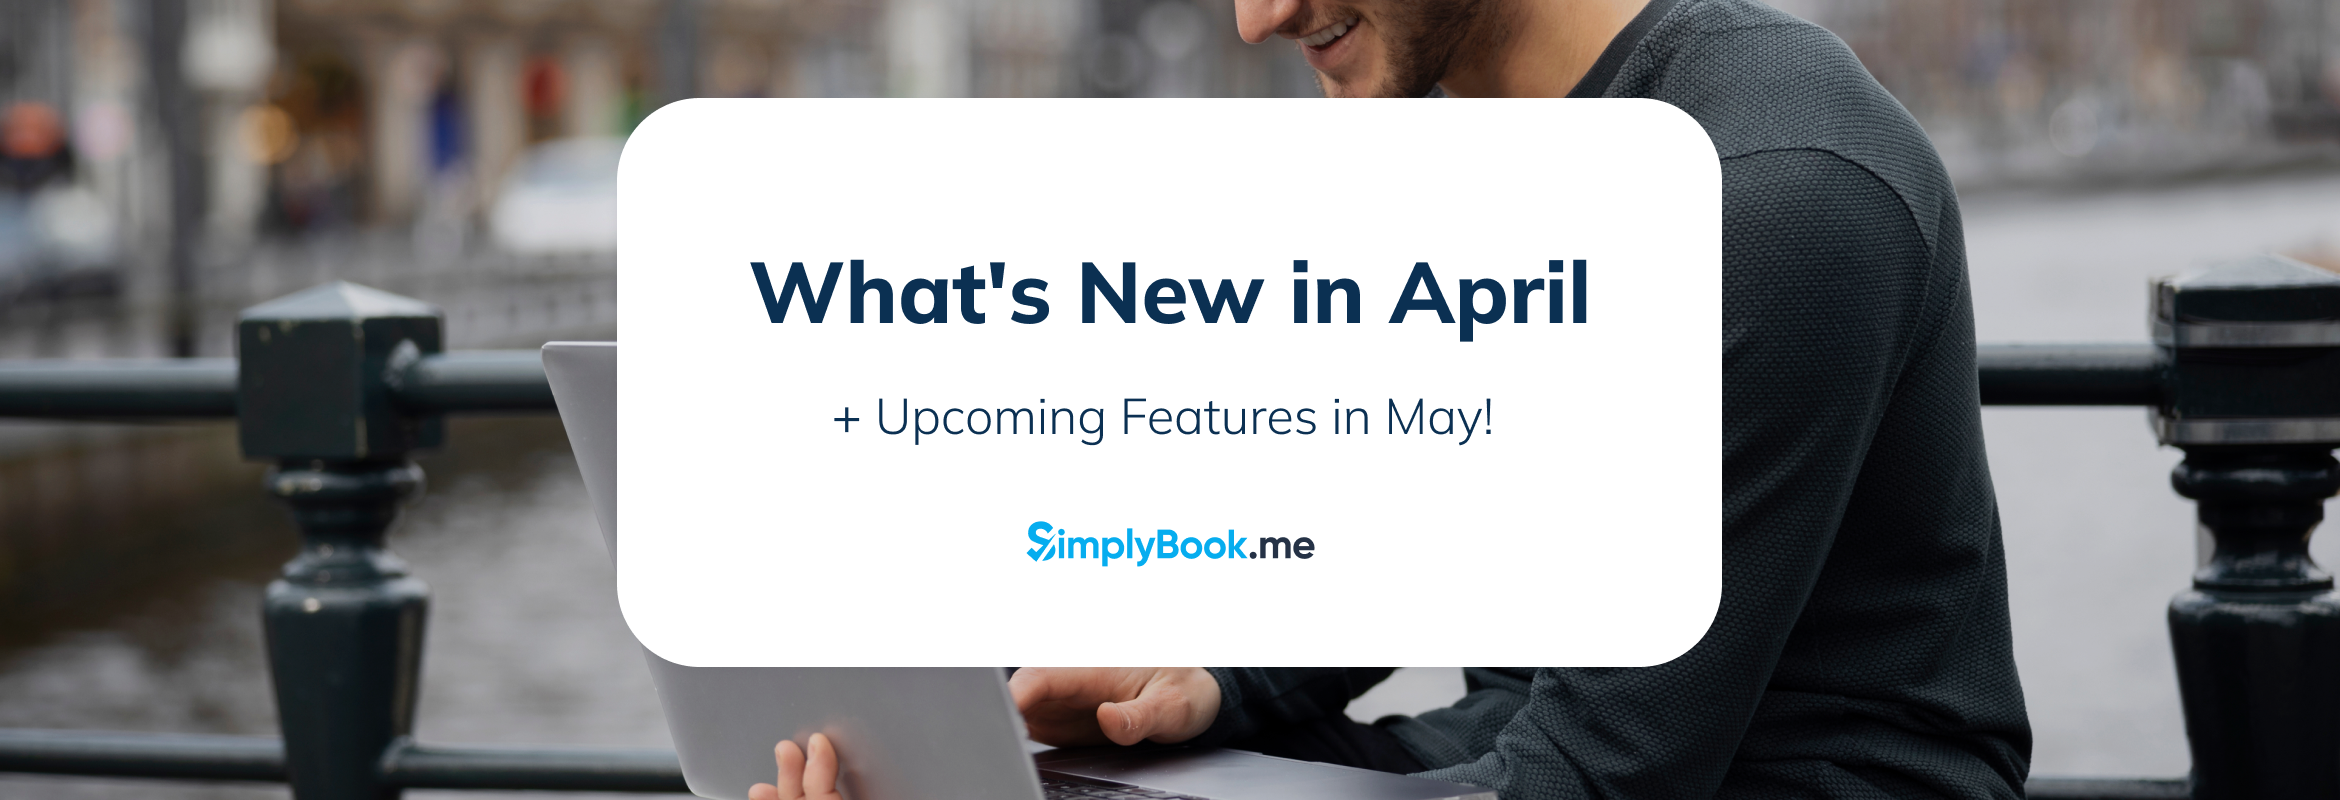 SimplyBook.me newsletter